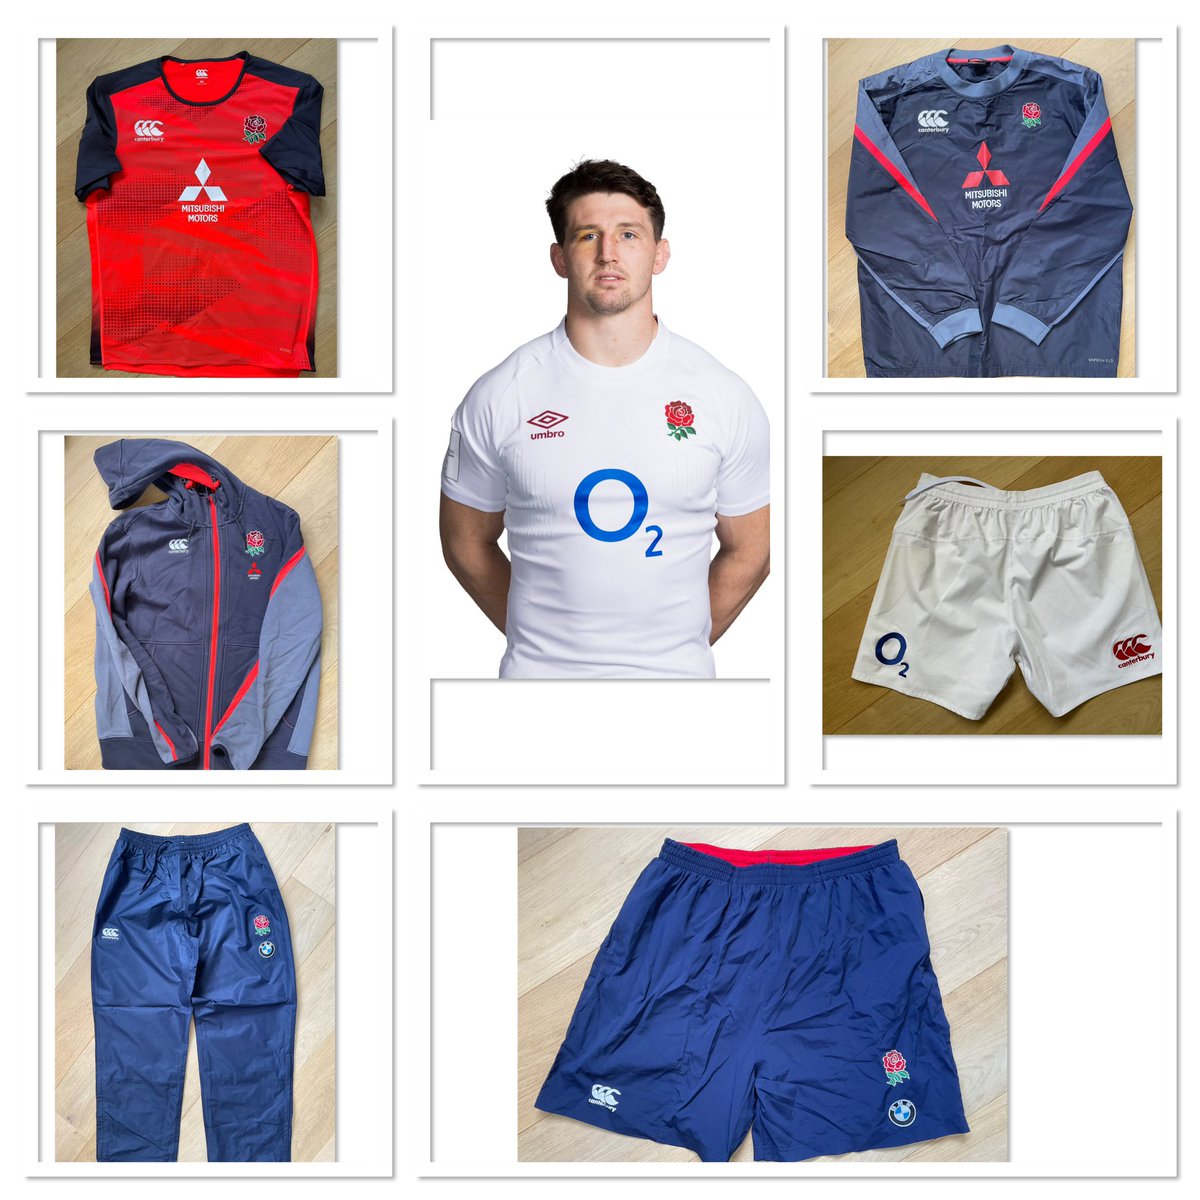 Also added some @EnglandRugby kit from @SaleSharksRugby try scorer at the weekend @BenCurry98 inmylocker.co.uk/collections/be… Ben also supporting @Place2Be